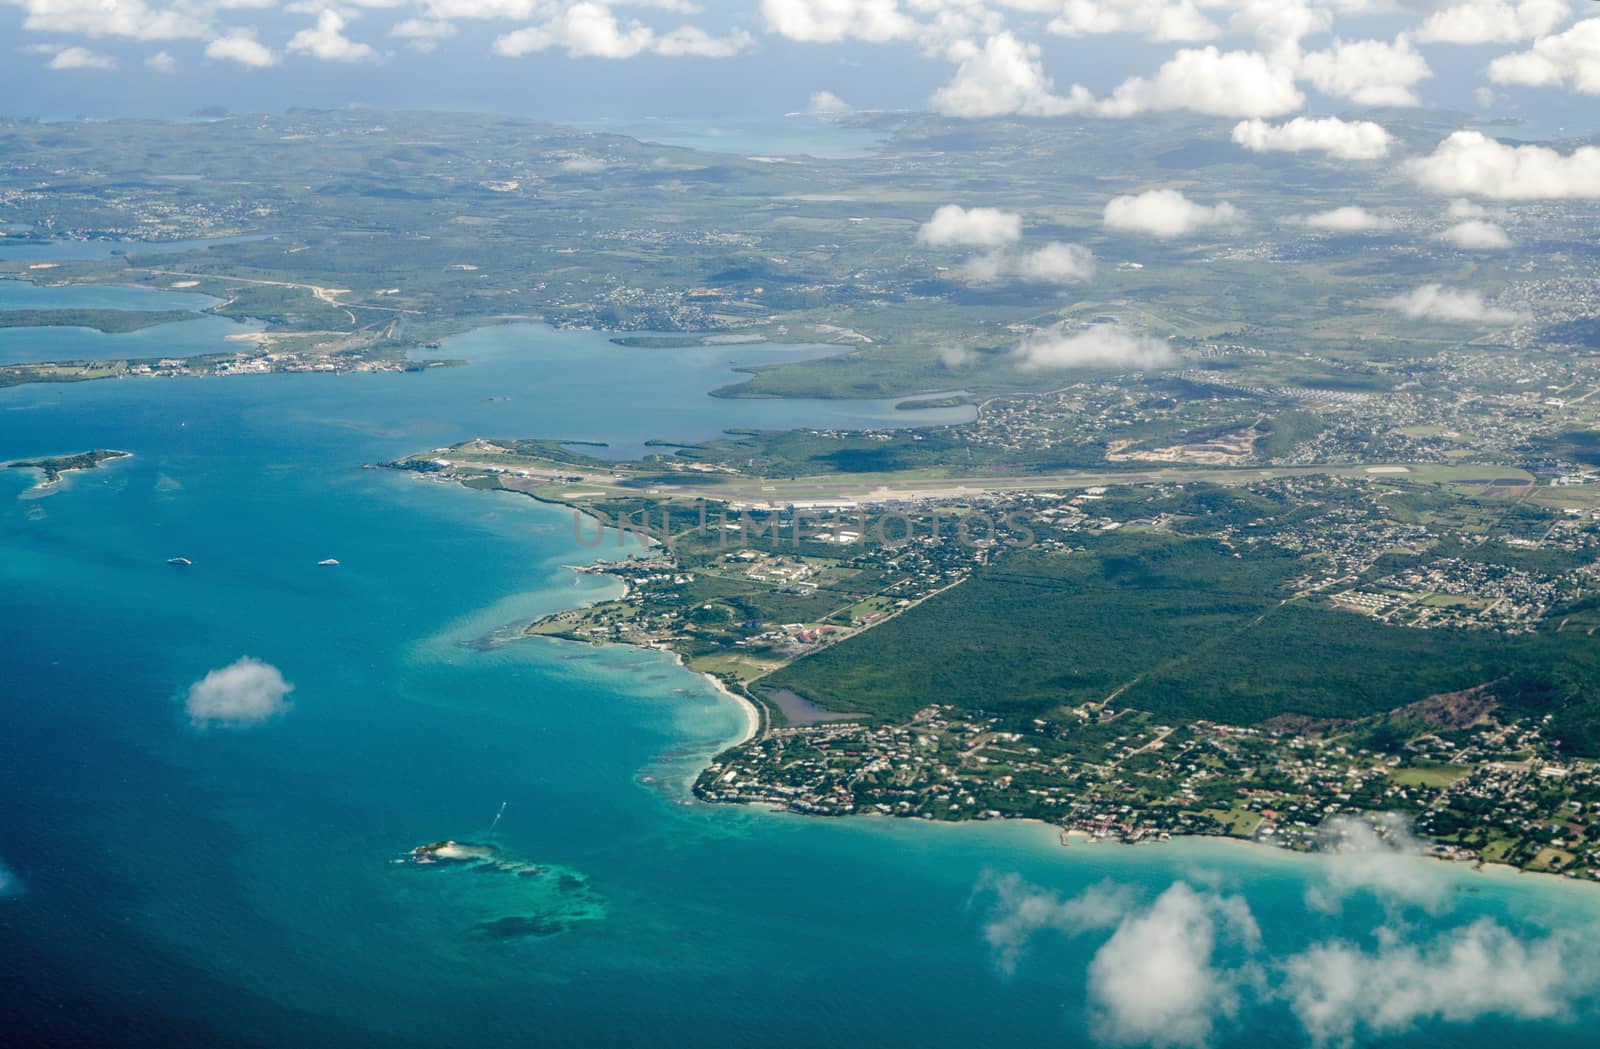 V.C. Bird Airport annd surrounding area, Antigua - aerial view by BasPhoto